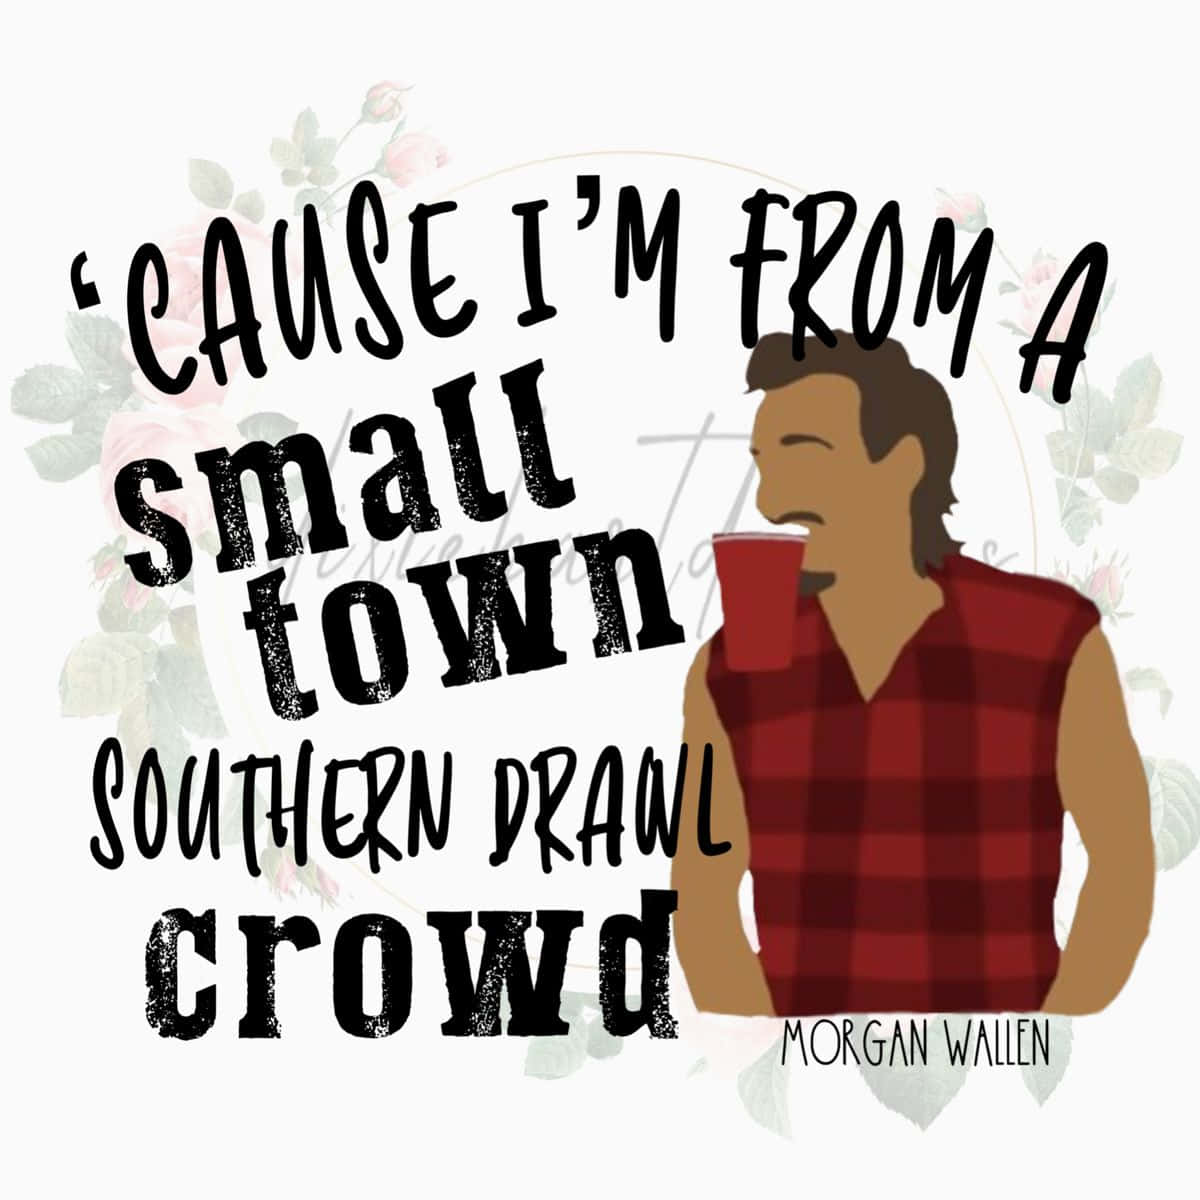 A Man With A Beer And A Quote Saying, I'm From A Small Town Southern Drunk Crowd